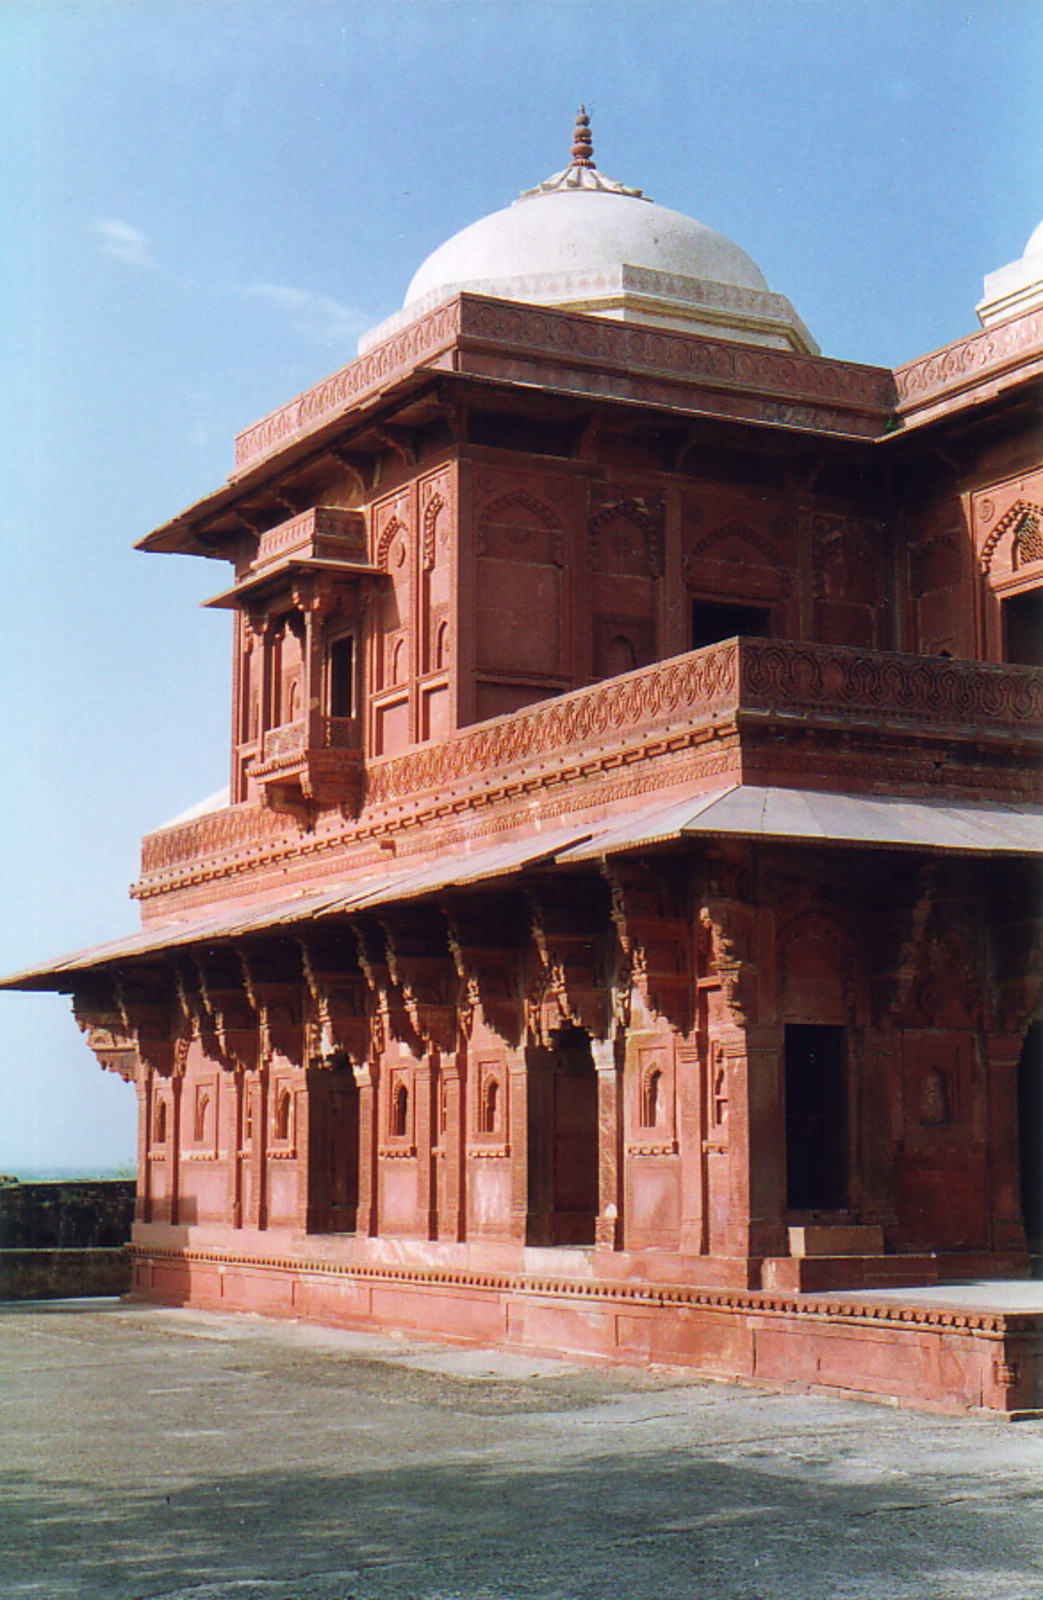 A red building in old Fatehpur Sikri